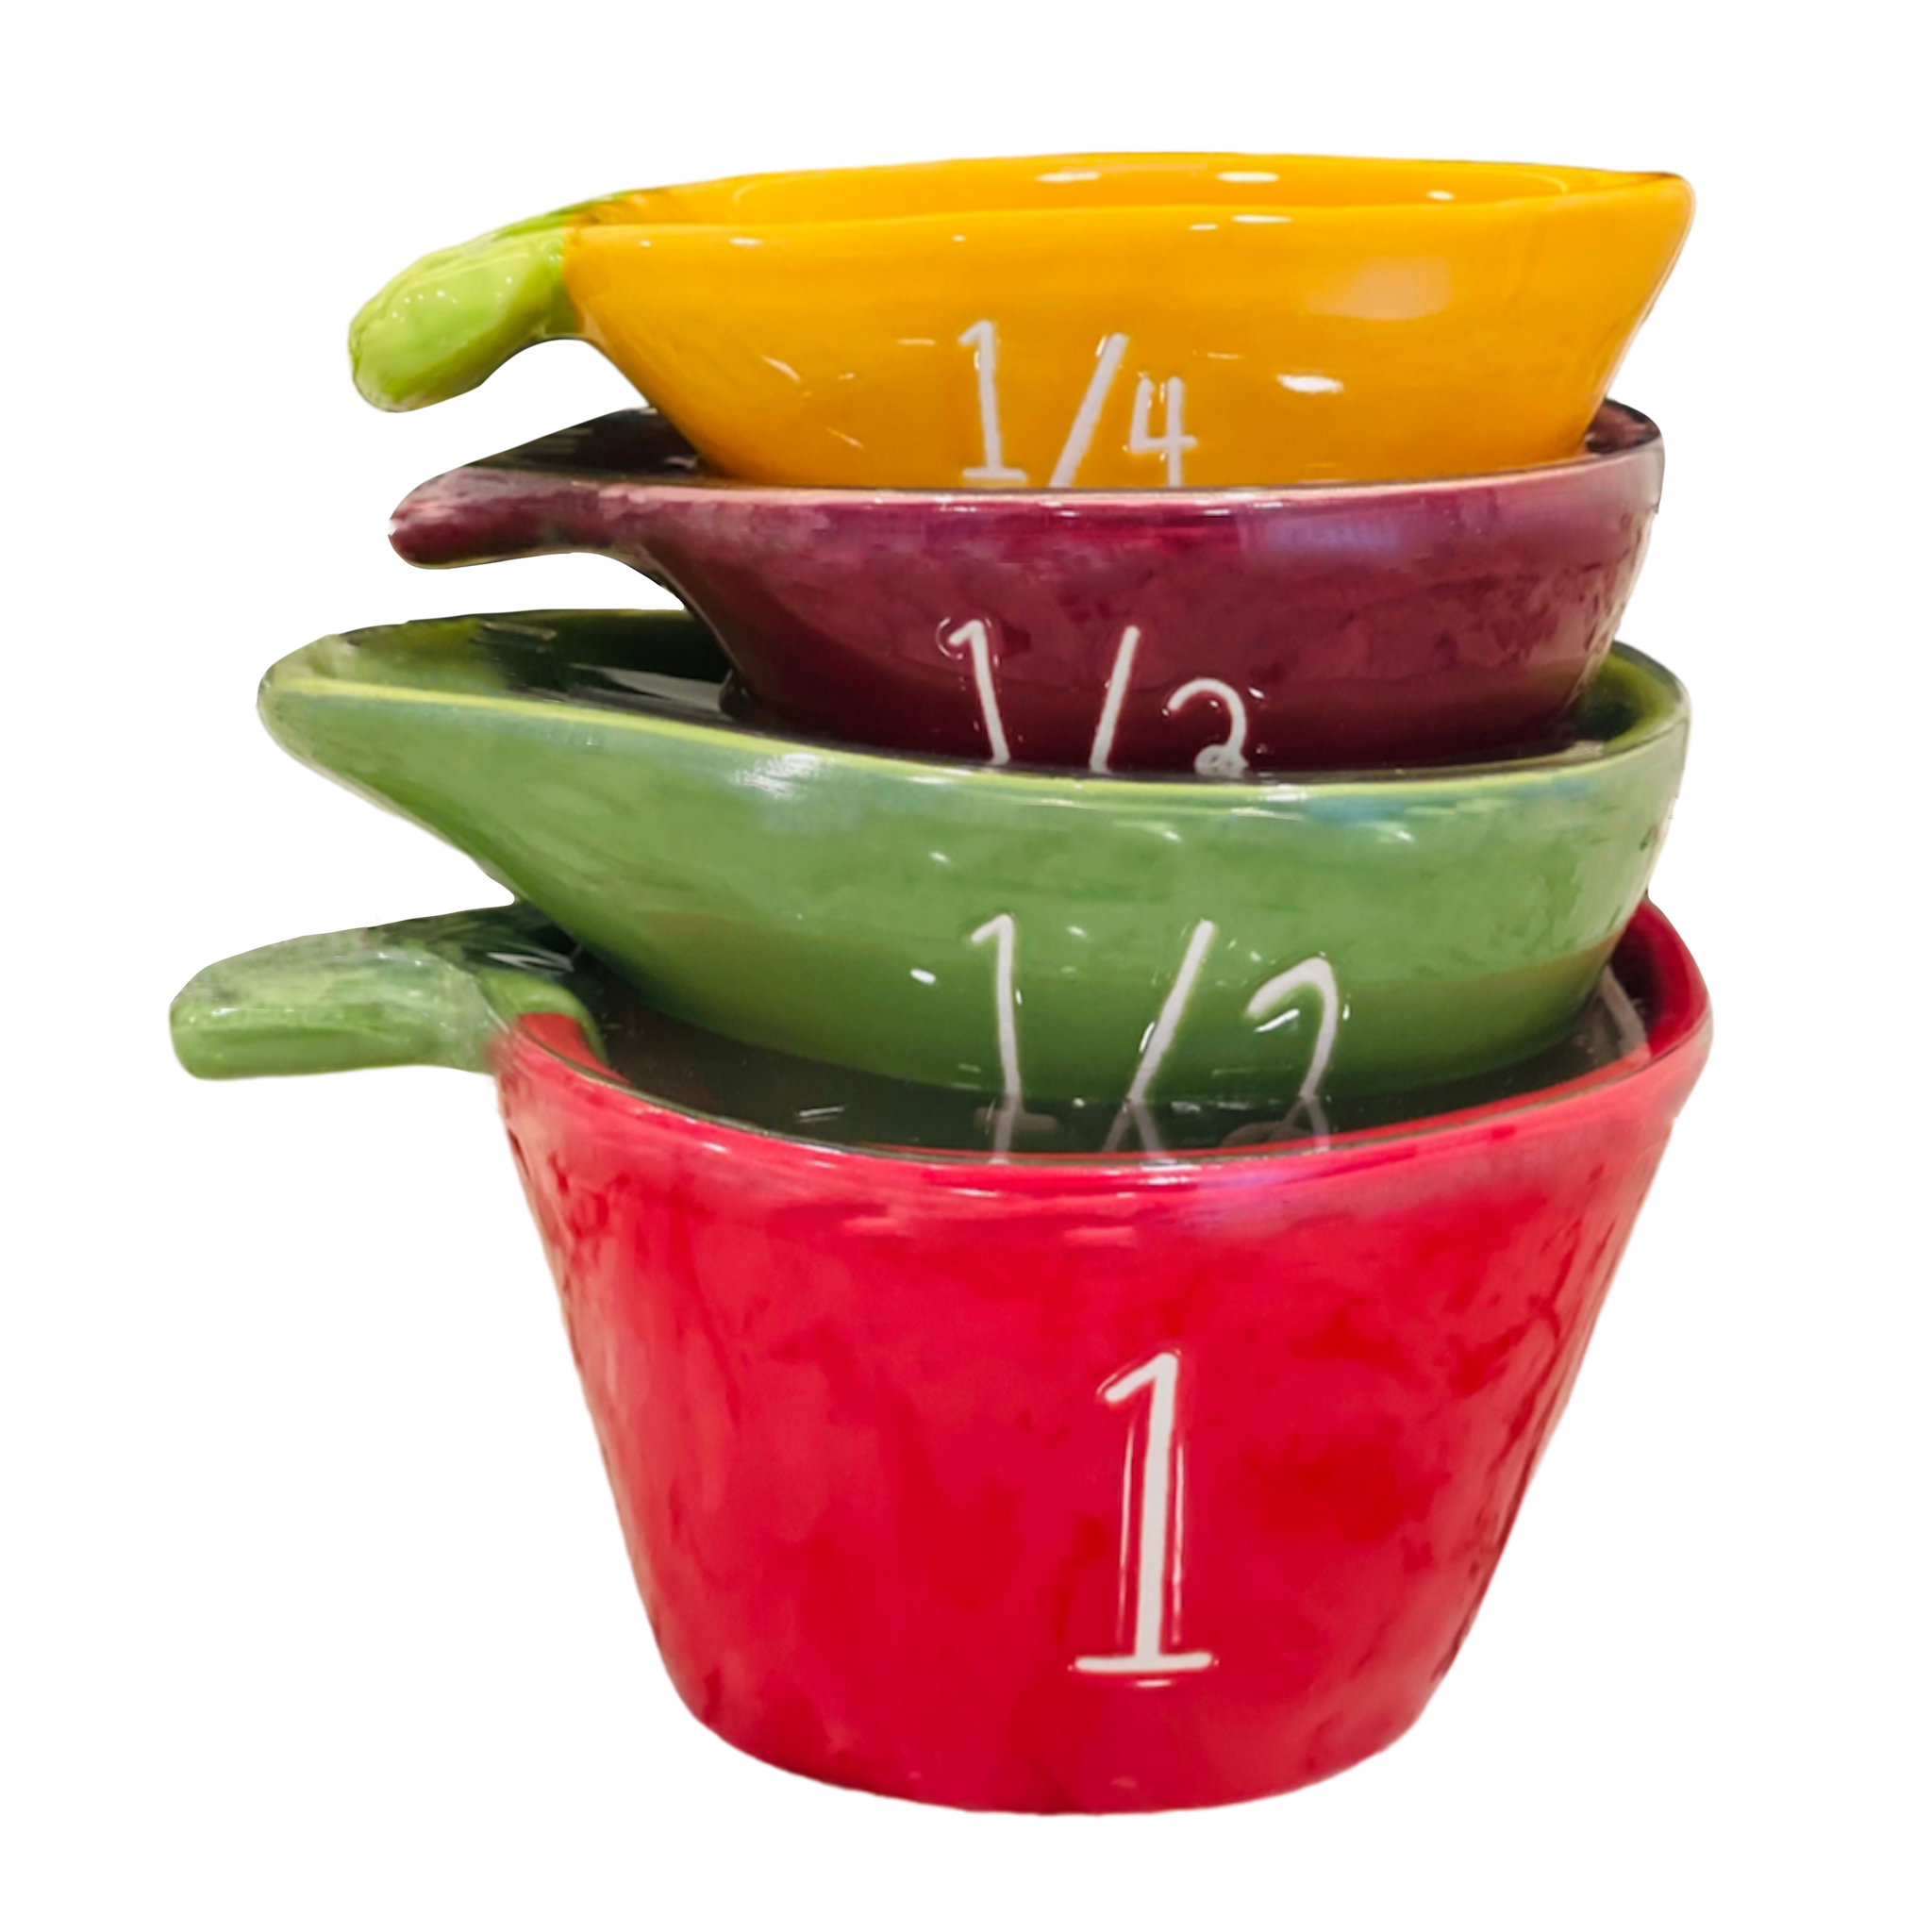 Brand new Rae Dunn measuring cups in 2023